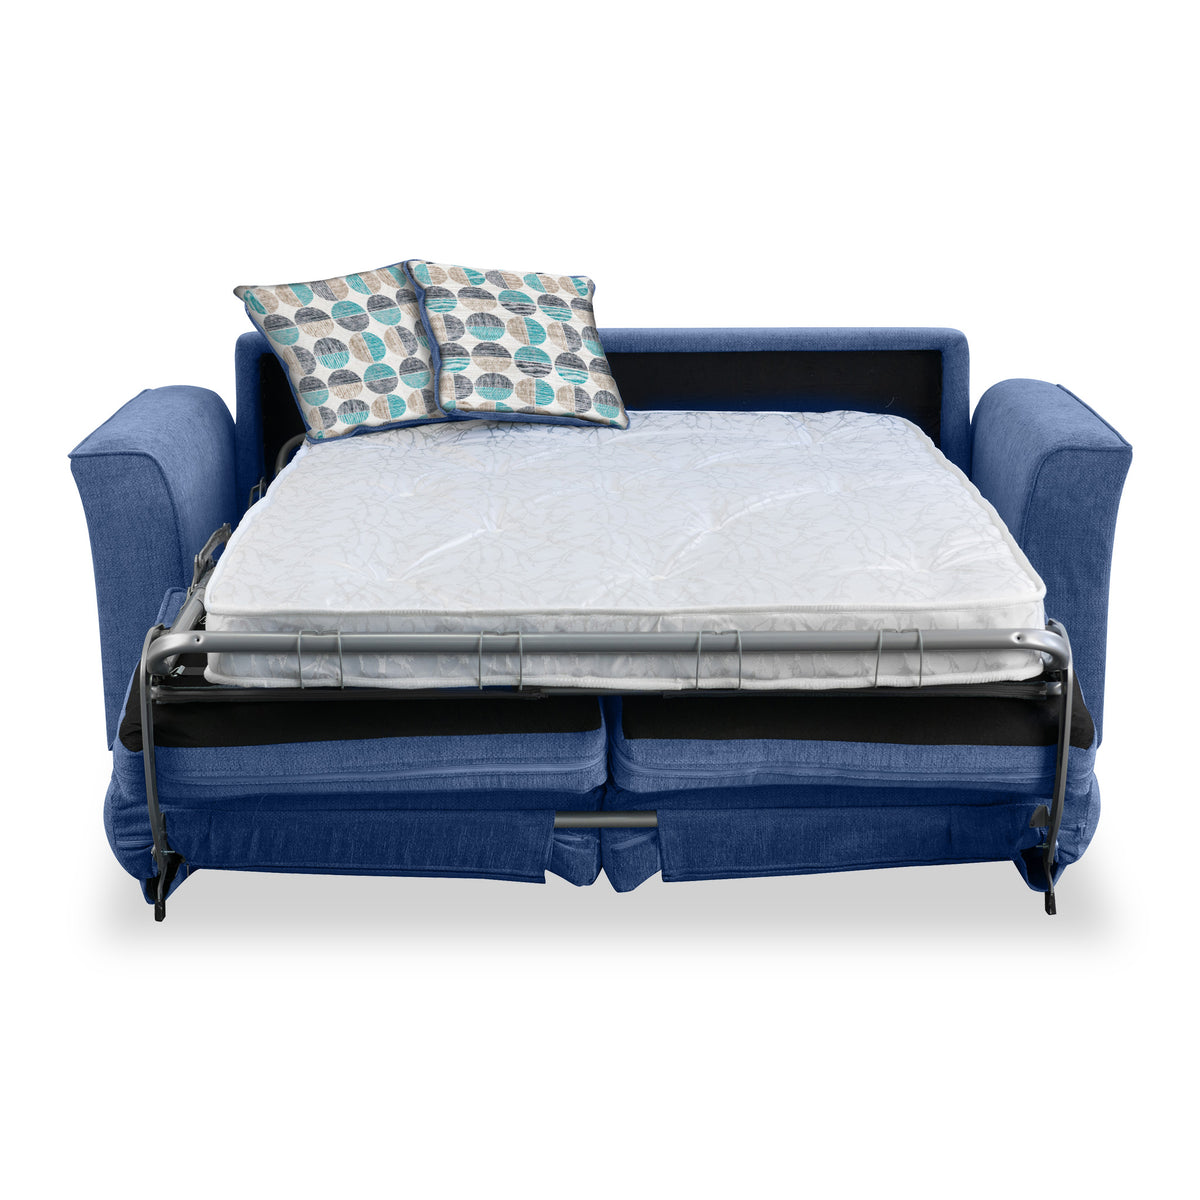 Abbott 2 Seater Sofabed in Denim with Rufus Blue Cushions by Roseland Furniture